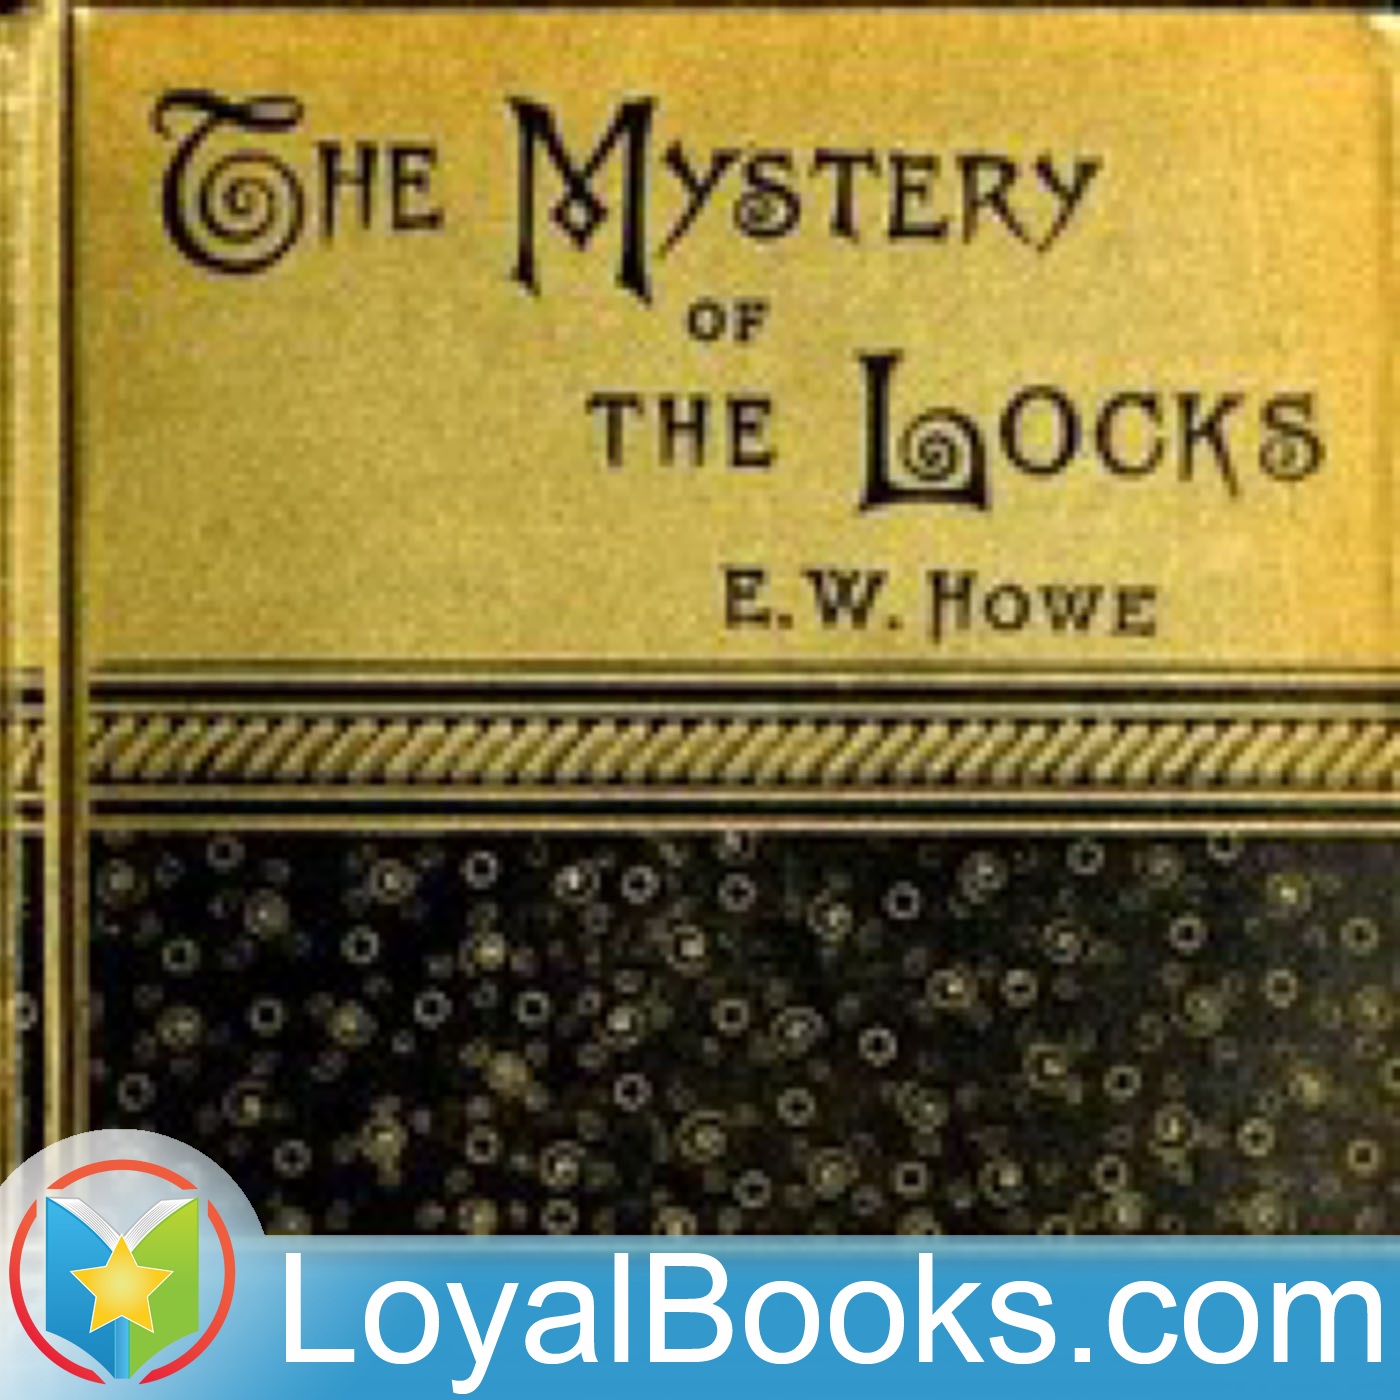 The Mystery of the Locks by E.W. Howe